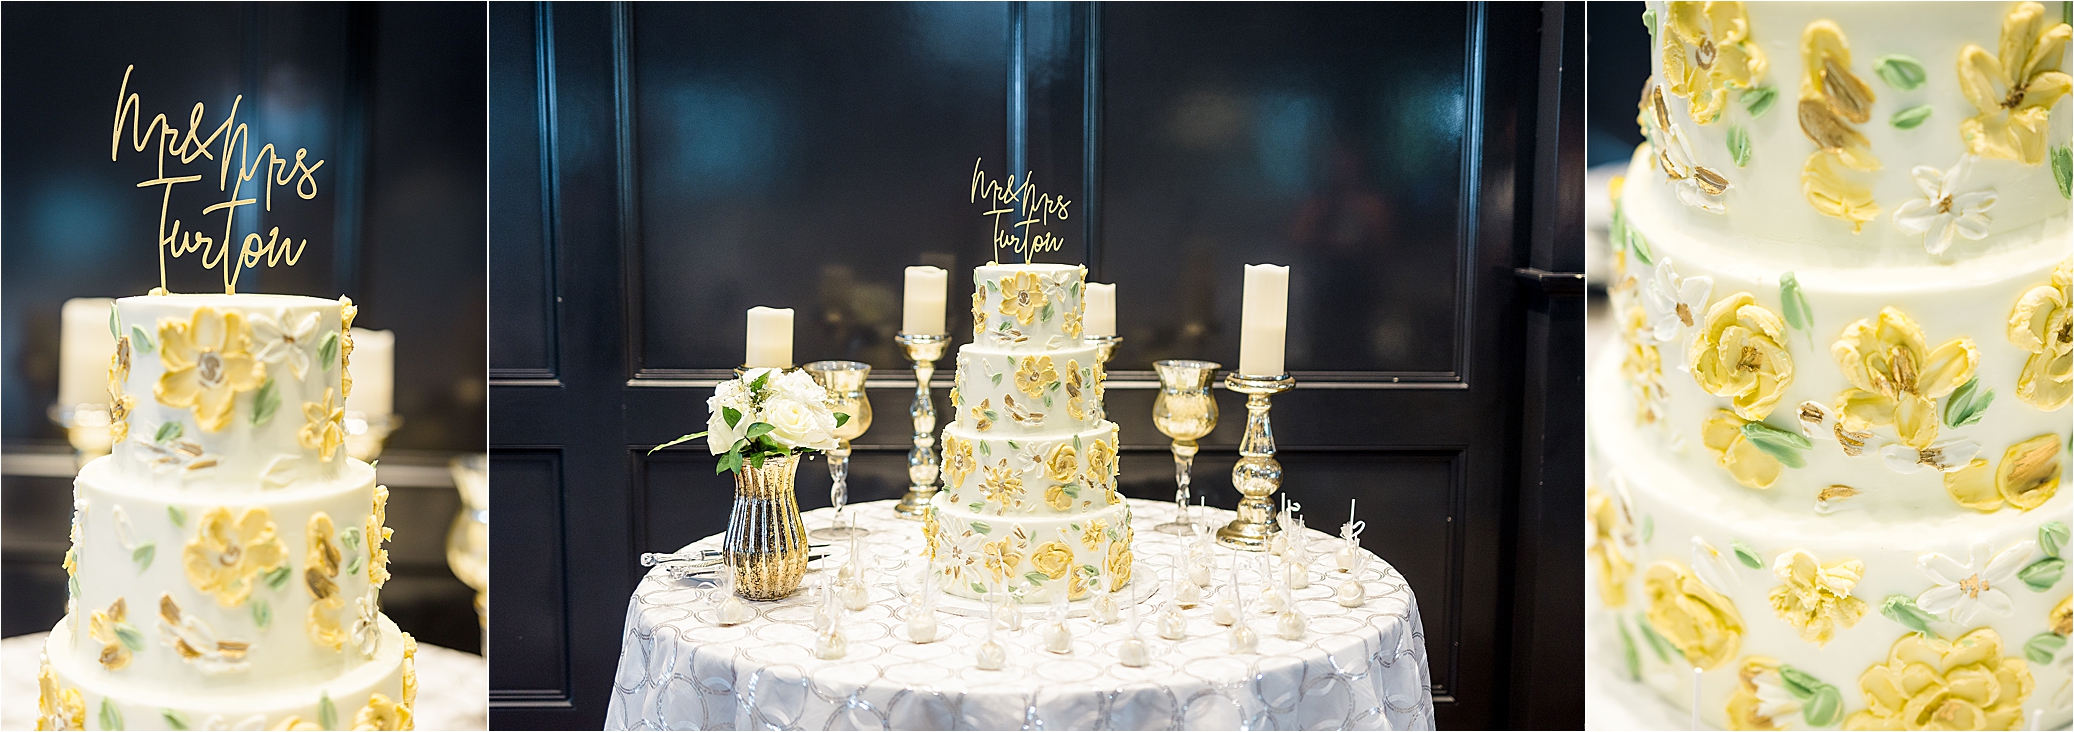 Wedding cake with yellow flowers at The Redberry Estate in San Antonio, Texas